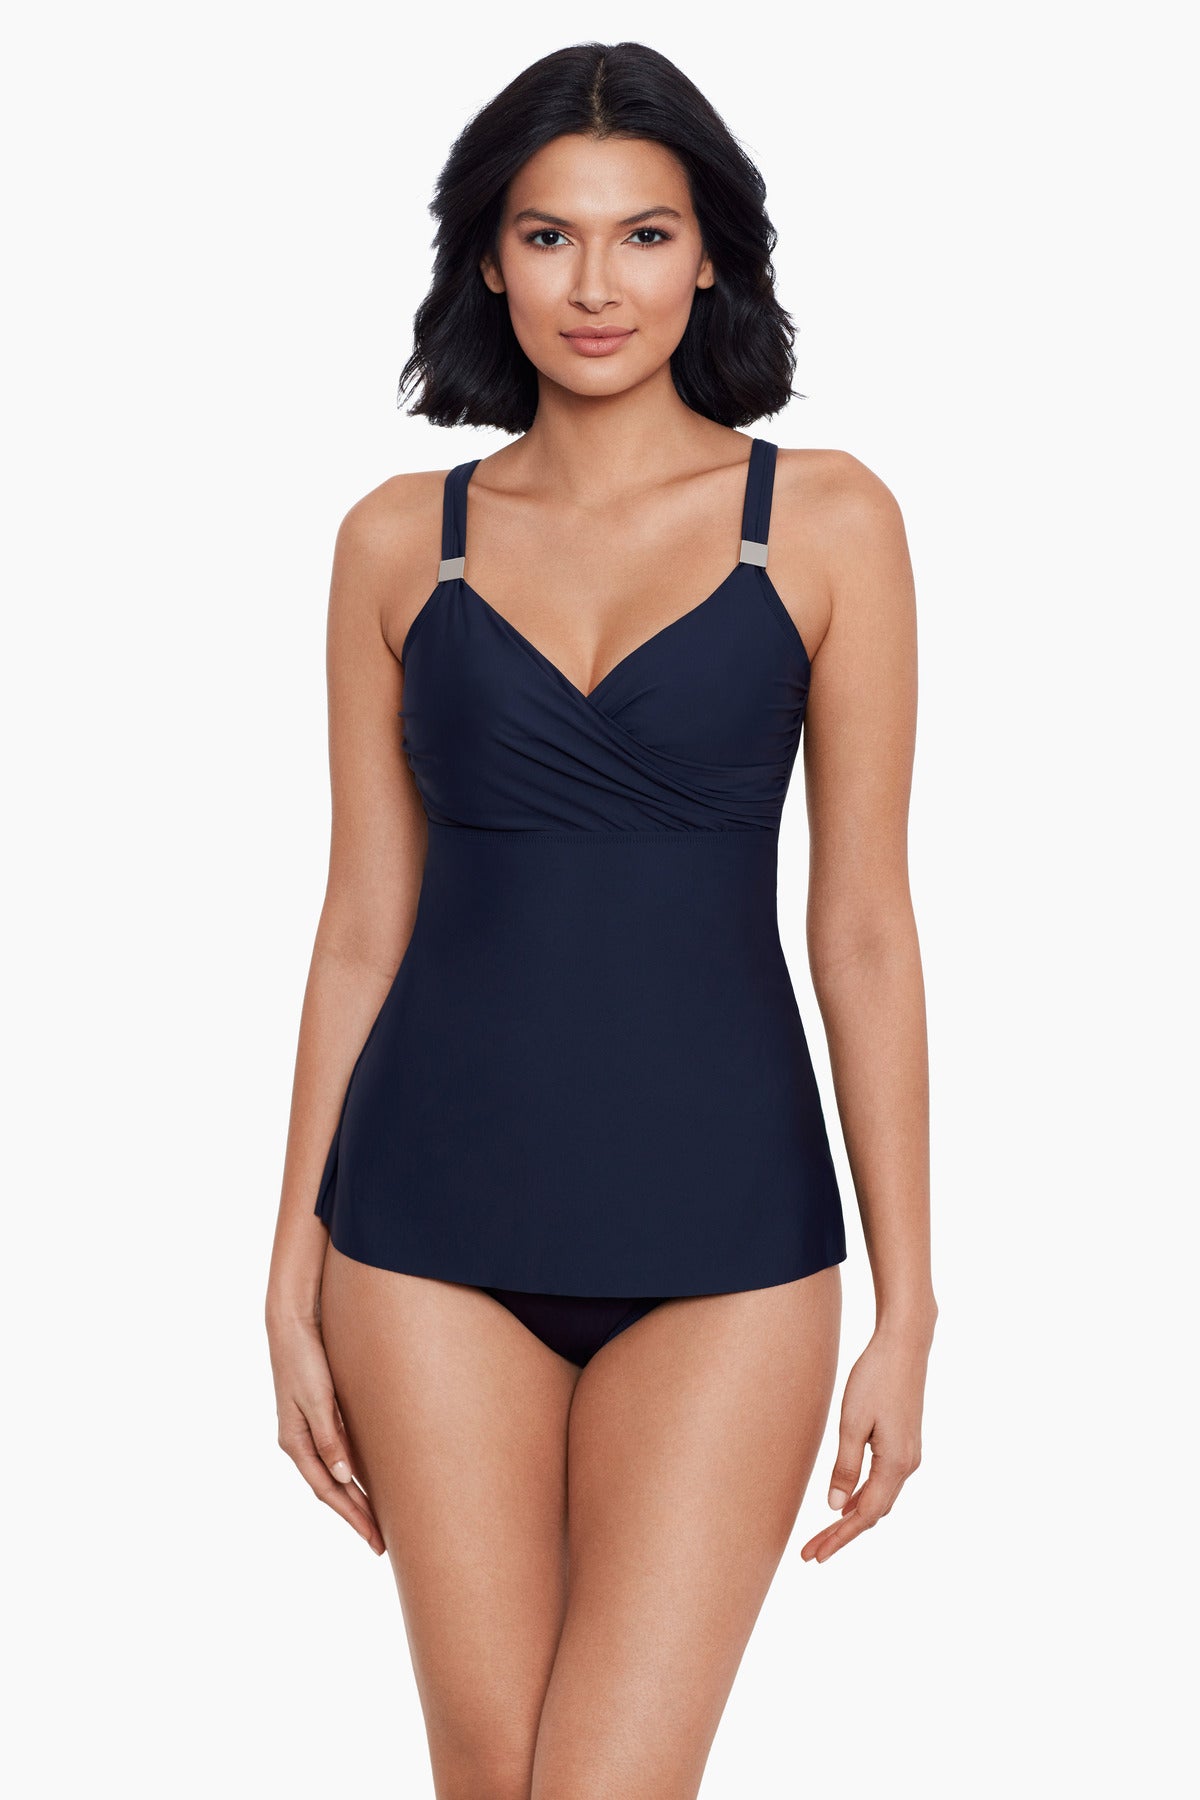 Miraclesuit Solid Regatta One Piece Swimsuit DDD-Cup